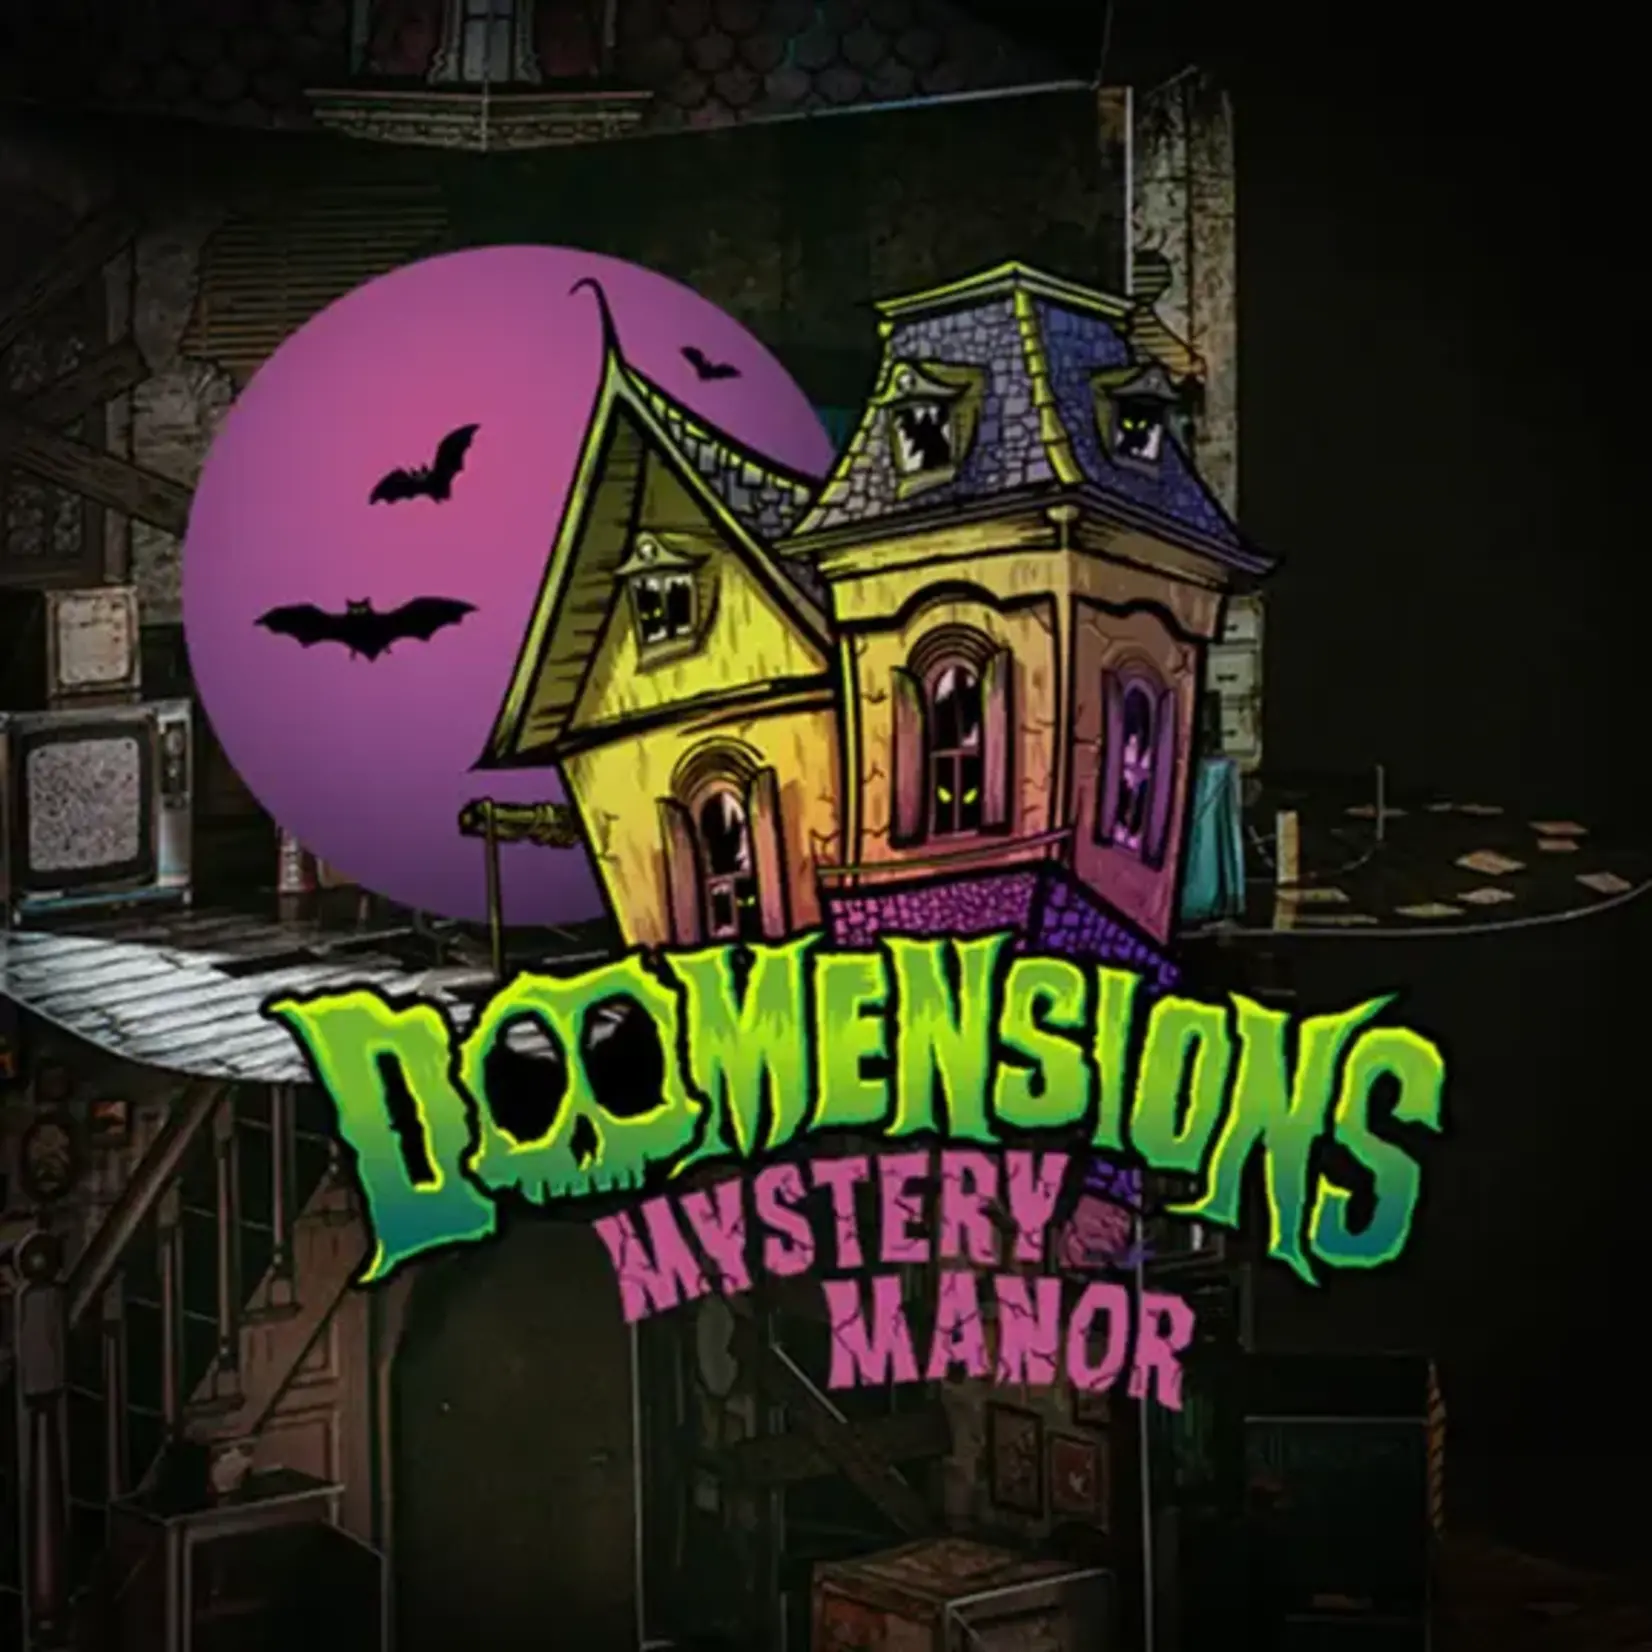 Curious Correspondence Doomensions Pop-Up Mystery Manor